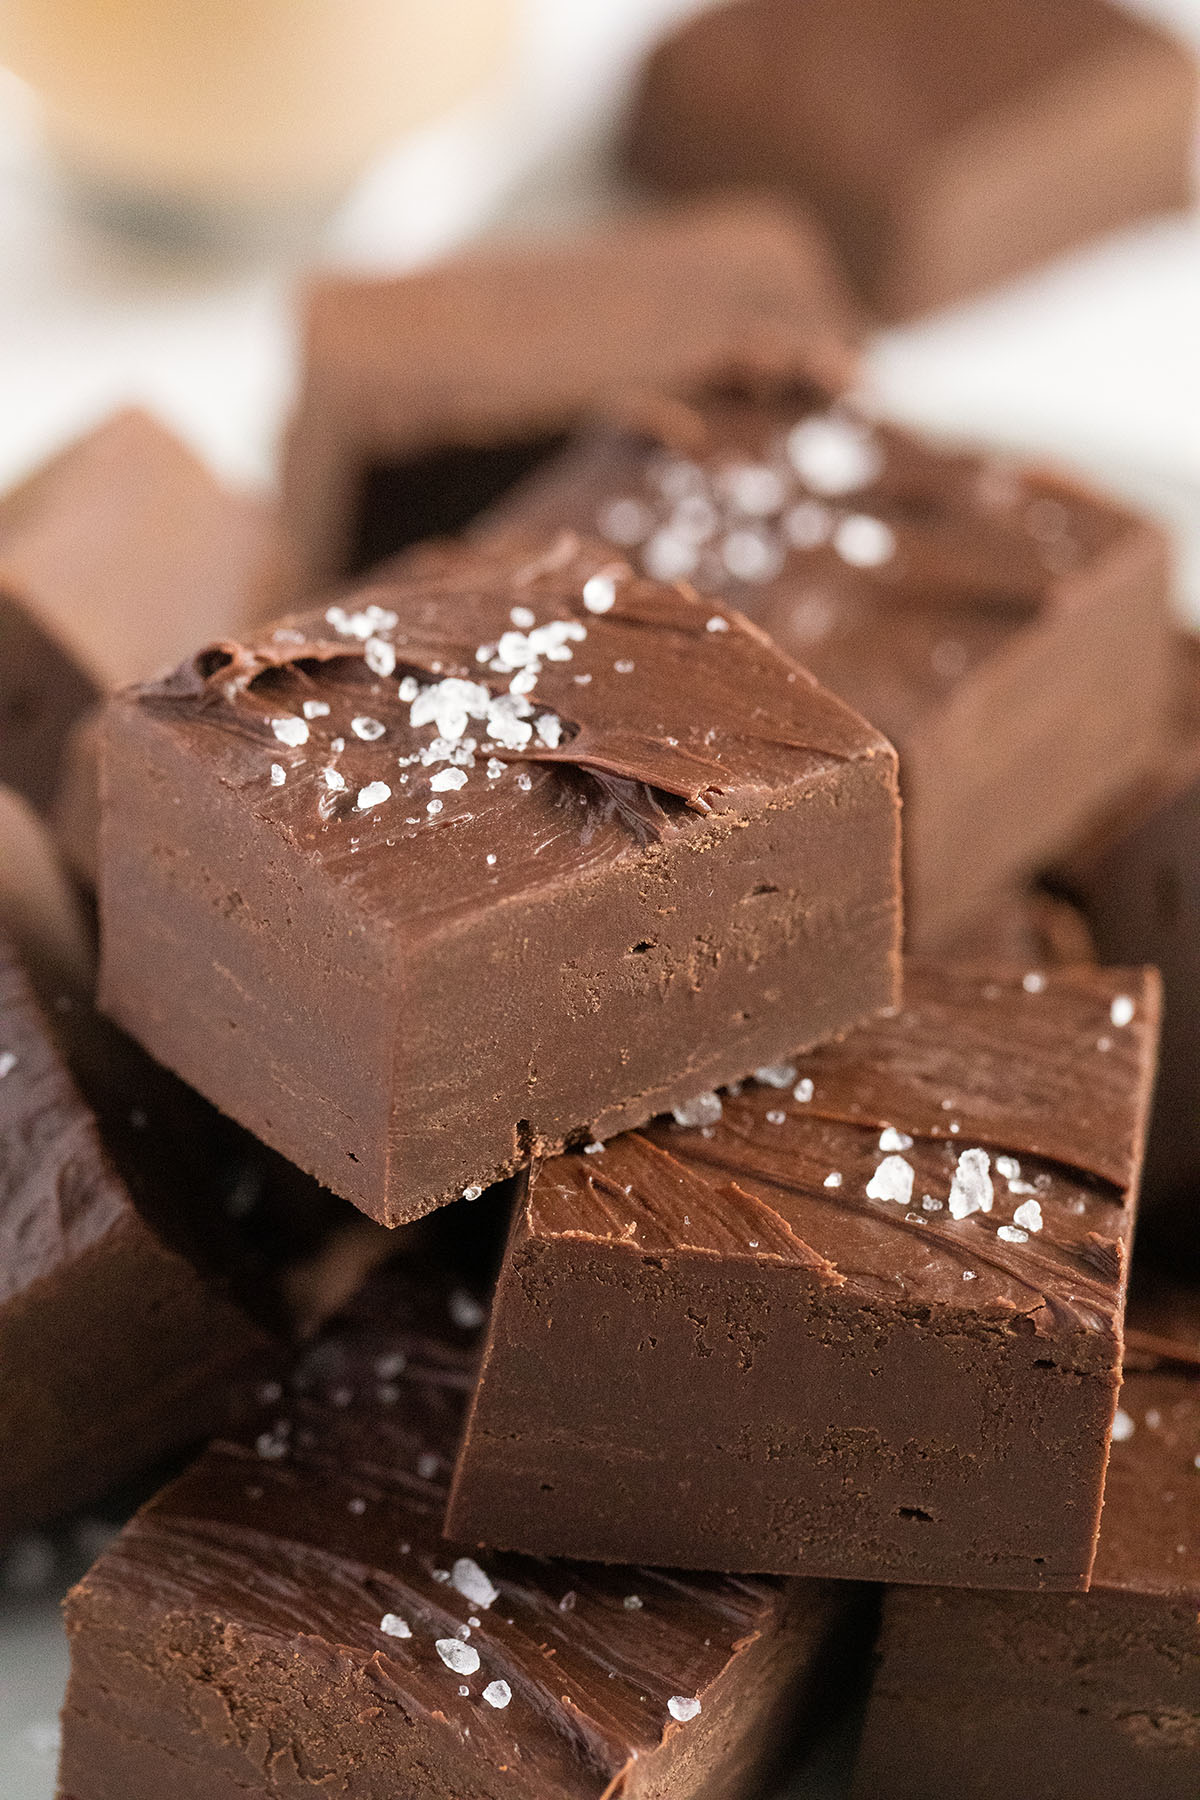 many creamy pieces of fudge made with baileys and sprinkled with sea salt.